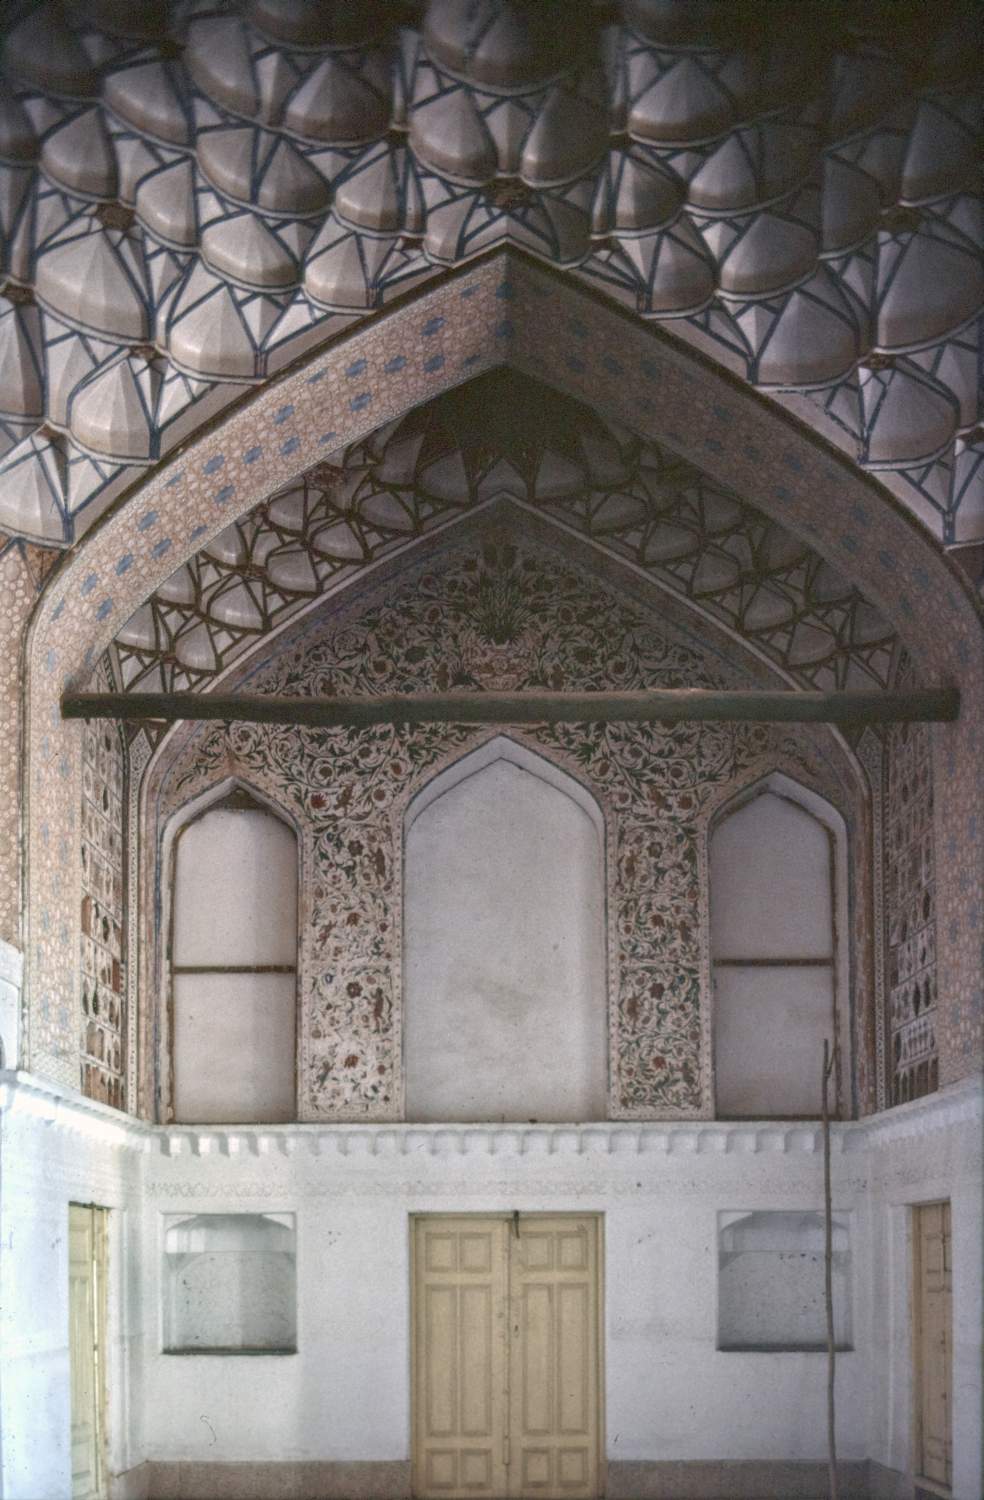 Private house in the Julfa neighborhood of Isfahan, interior view showing muqarnas and wall decorations